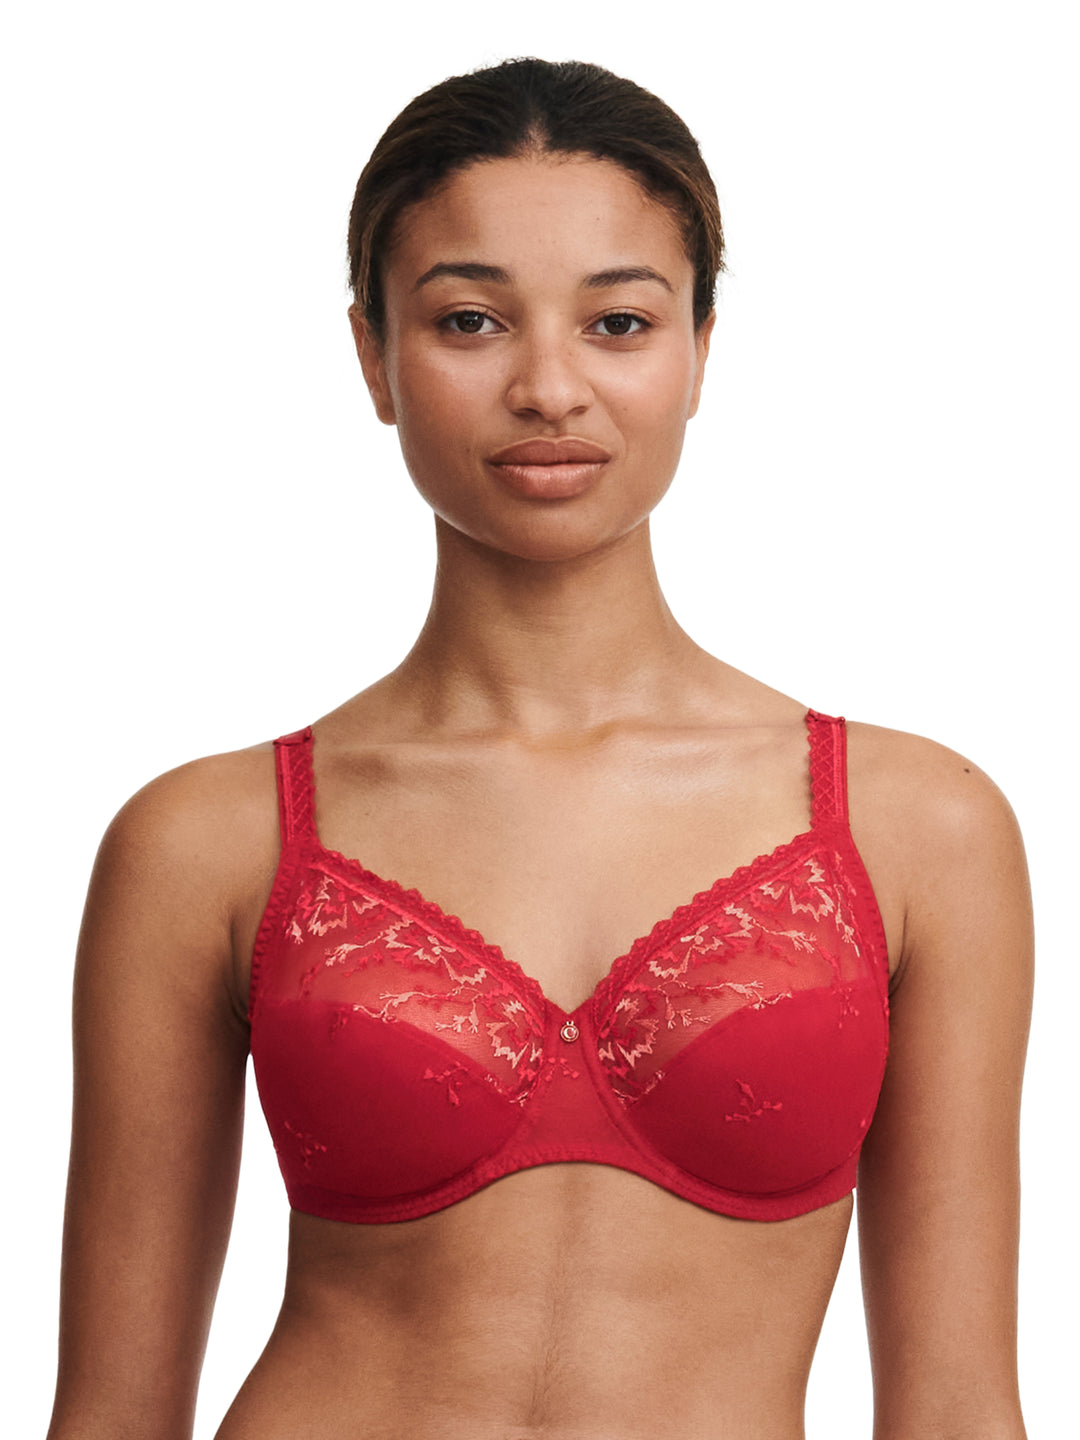 Chantelle - Every Curve Very Covering Underwired Bra Scarlet / Peach